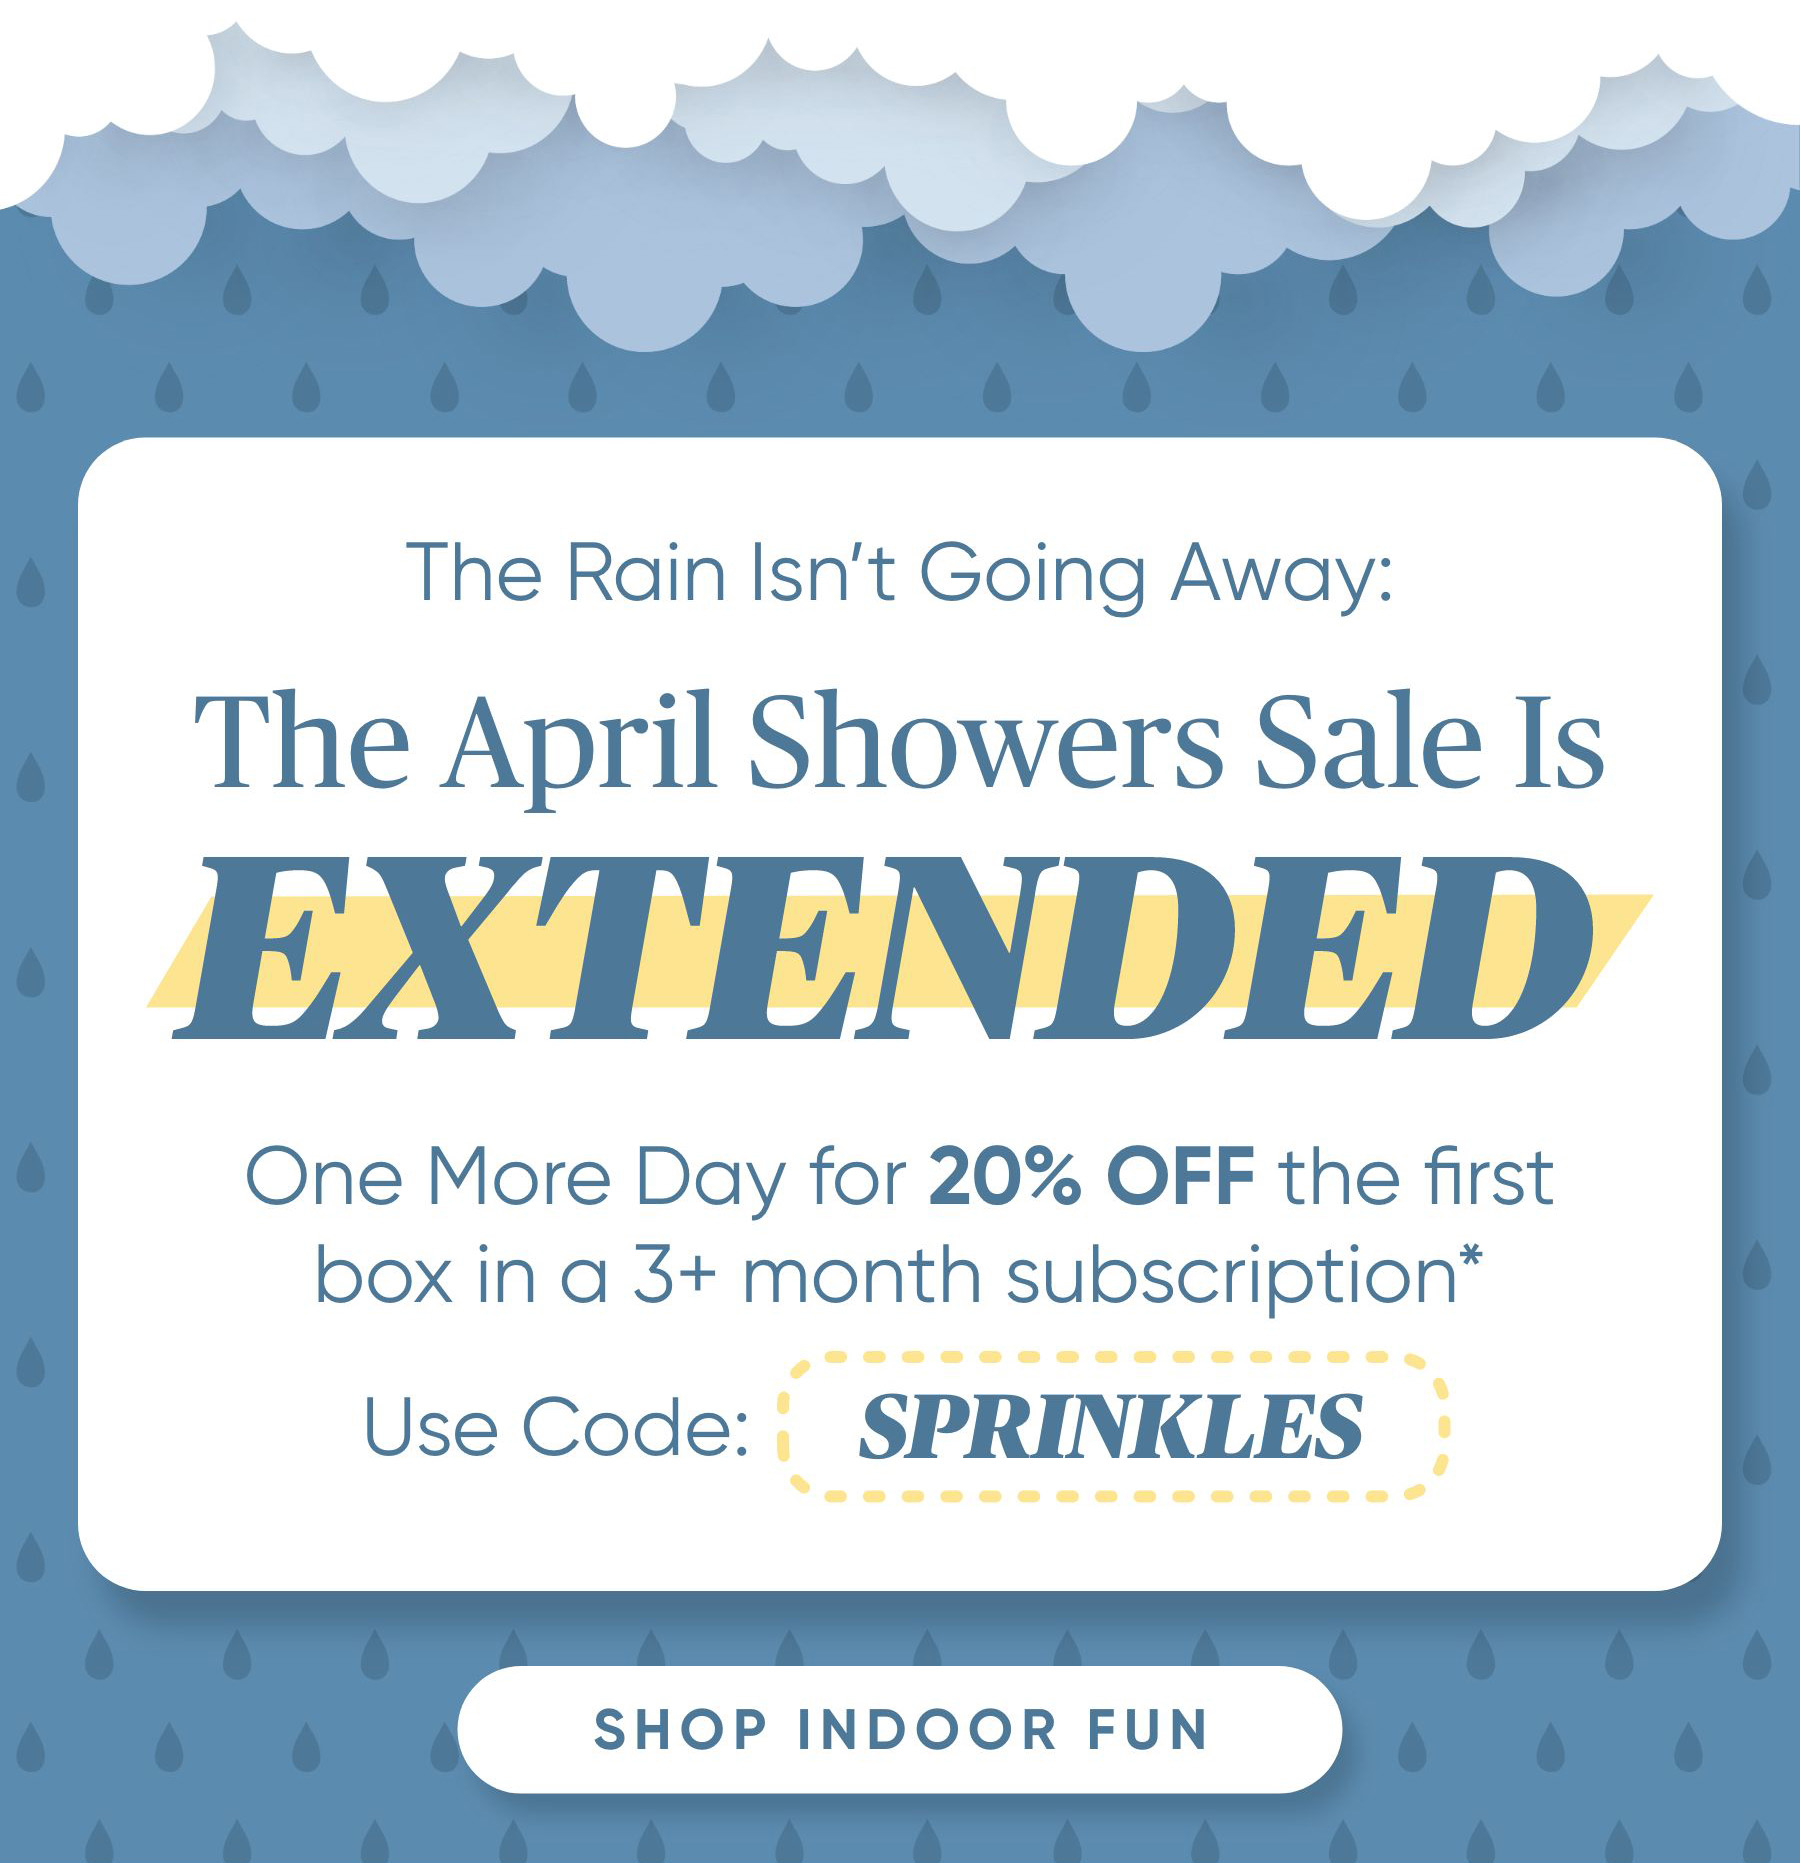 The Rain Isnt Going Away: The April Showers Sale Is Extended!    One more day for 20% OFF the first box in a 3+ month subscription* Use Code: SPRINKLES  Shop Indoor Fun